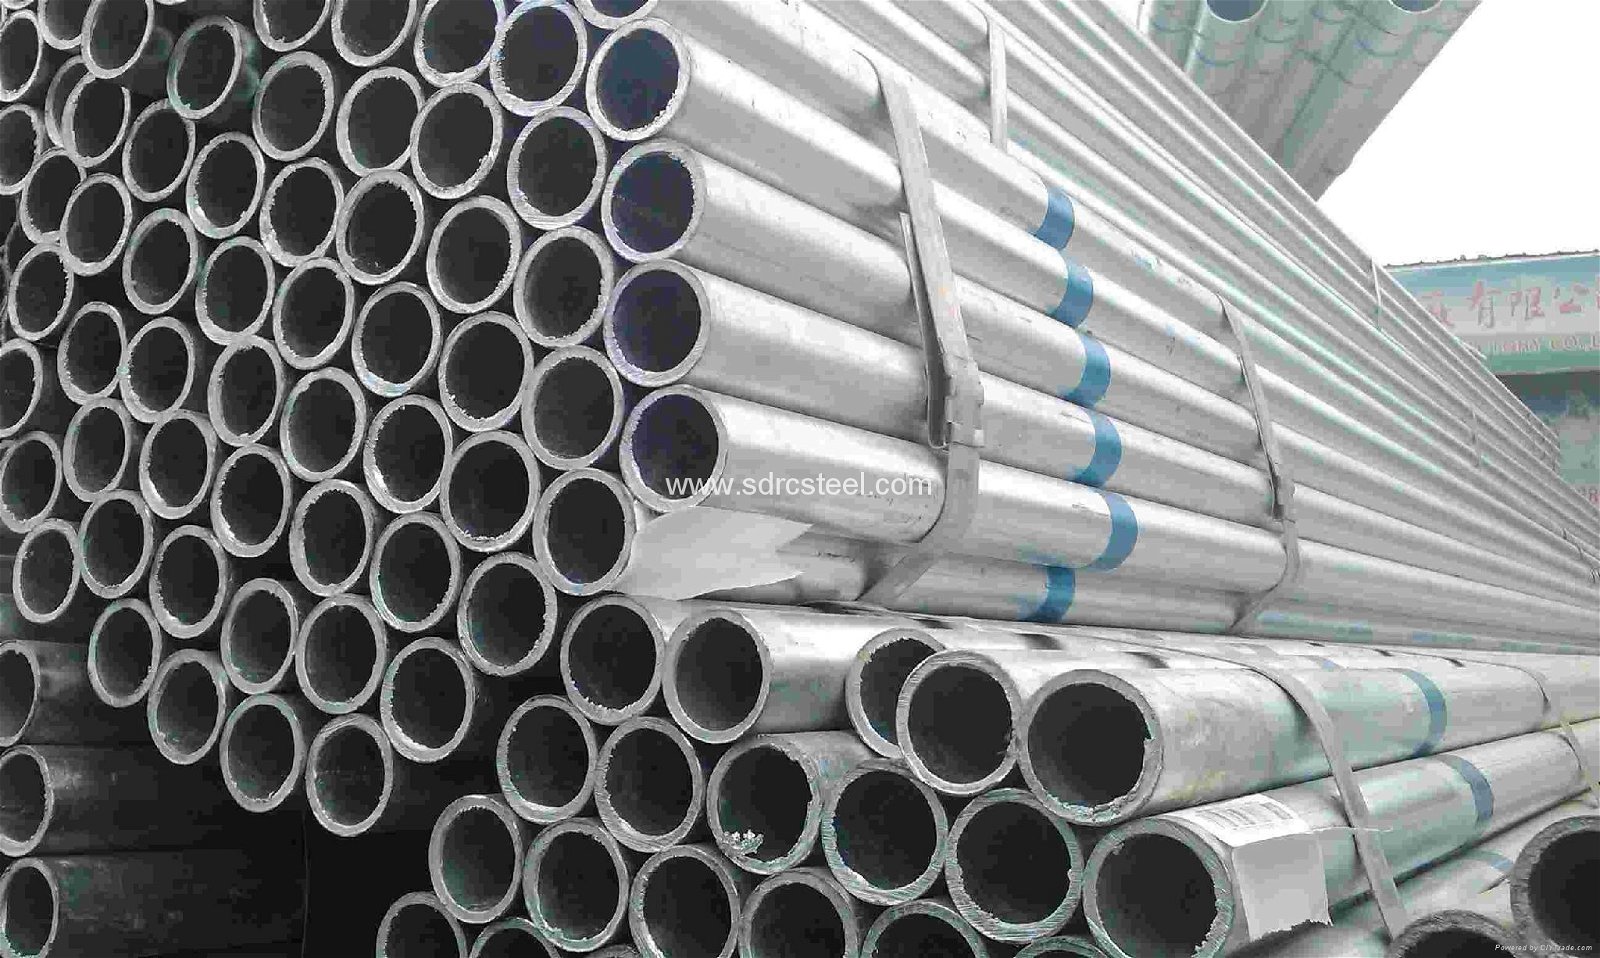 Welded Connection Round Hot-DIP Galvanized Steel Pipe 5